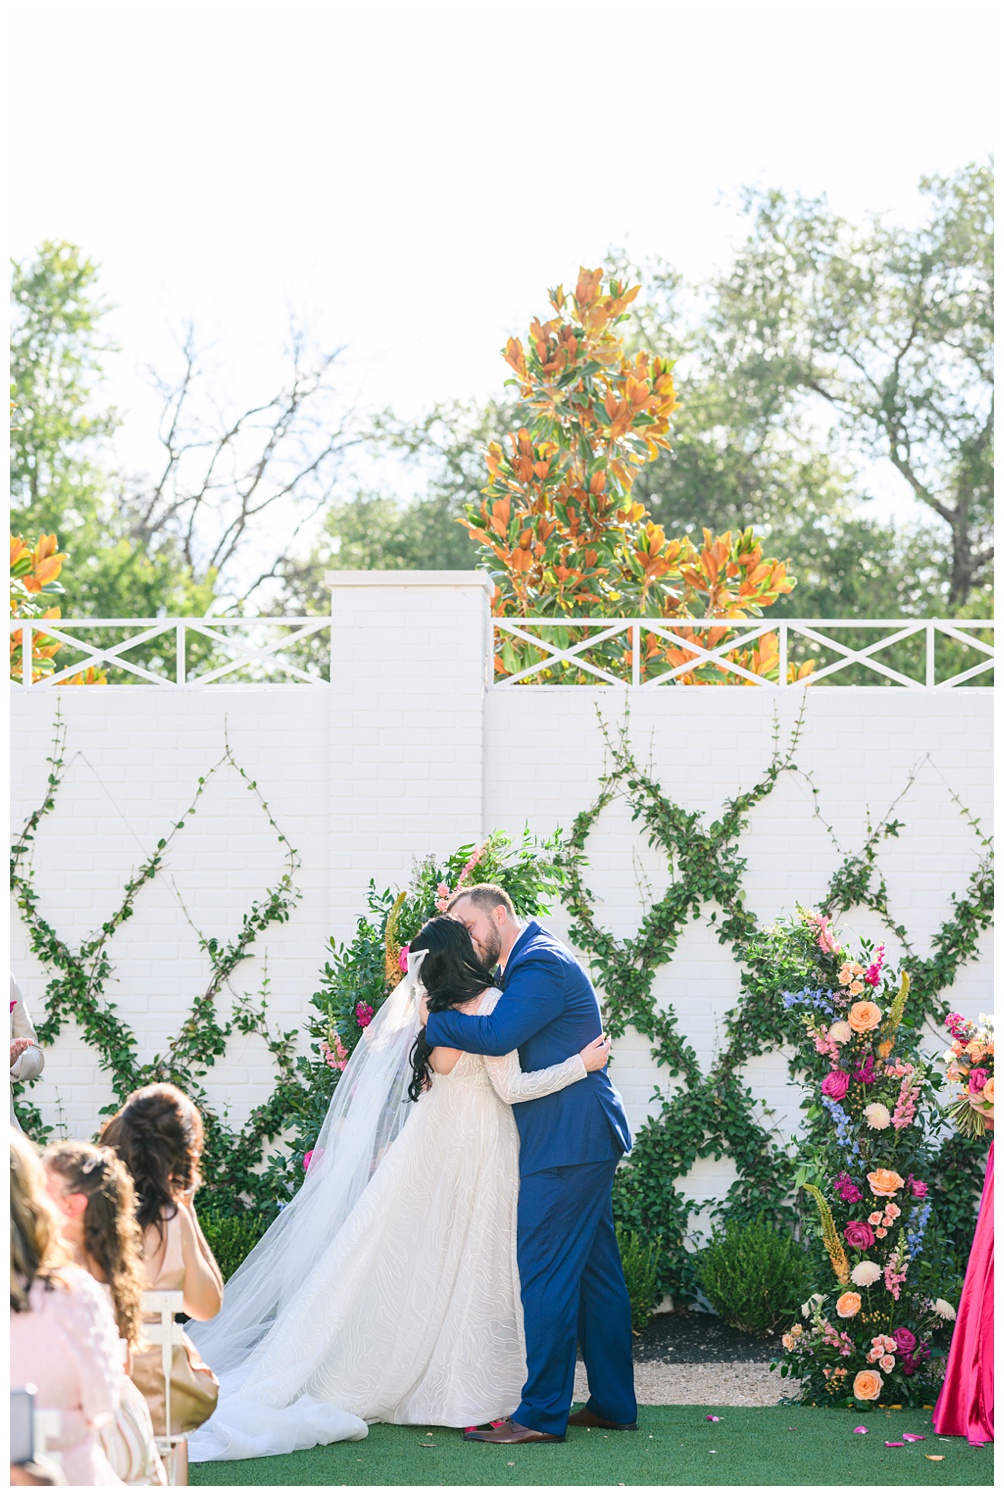 First Kiss Photo at Wish Well House Wedding in Georgetown Texas